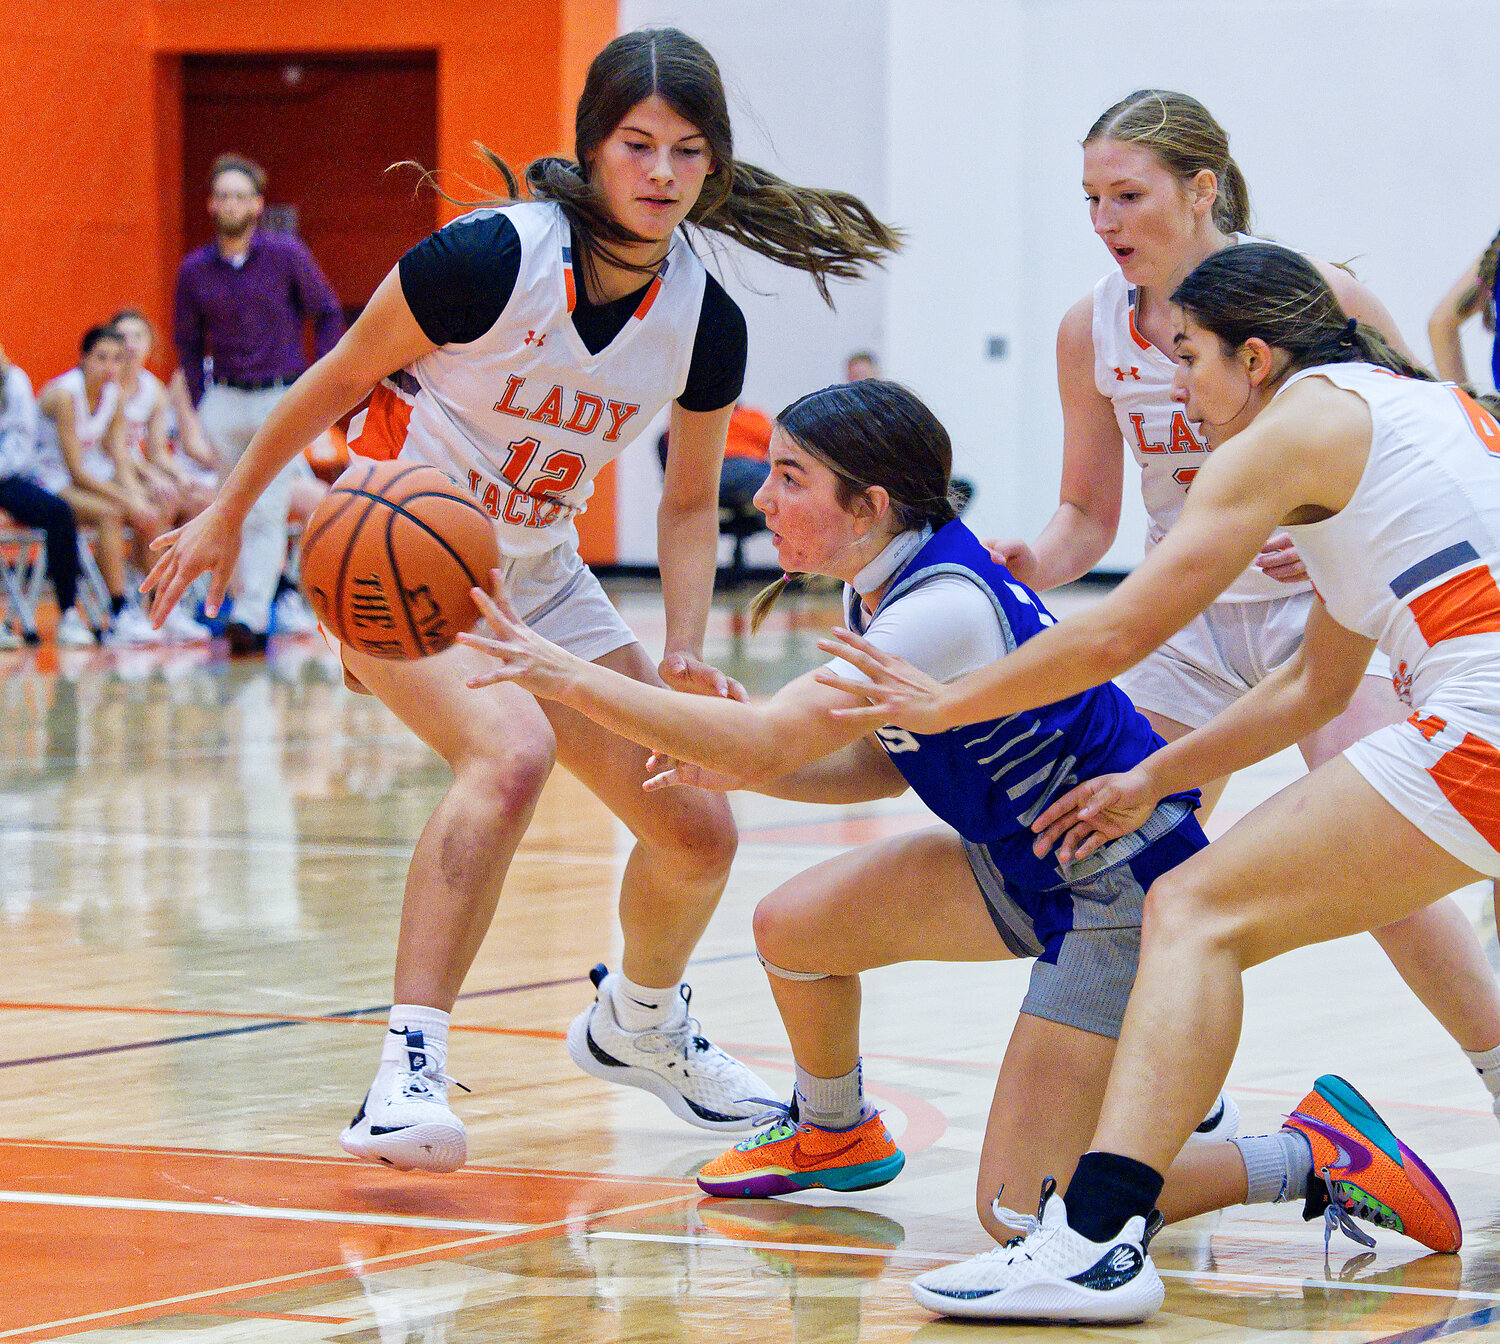 Left to right, Mahayla McMahon, Macy Fischer and Carmen Carrasco apply full-court pressure to Rains. [more hoops highlights here]